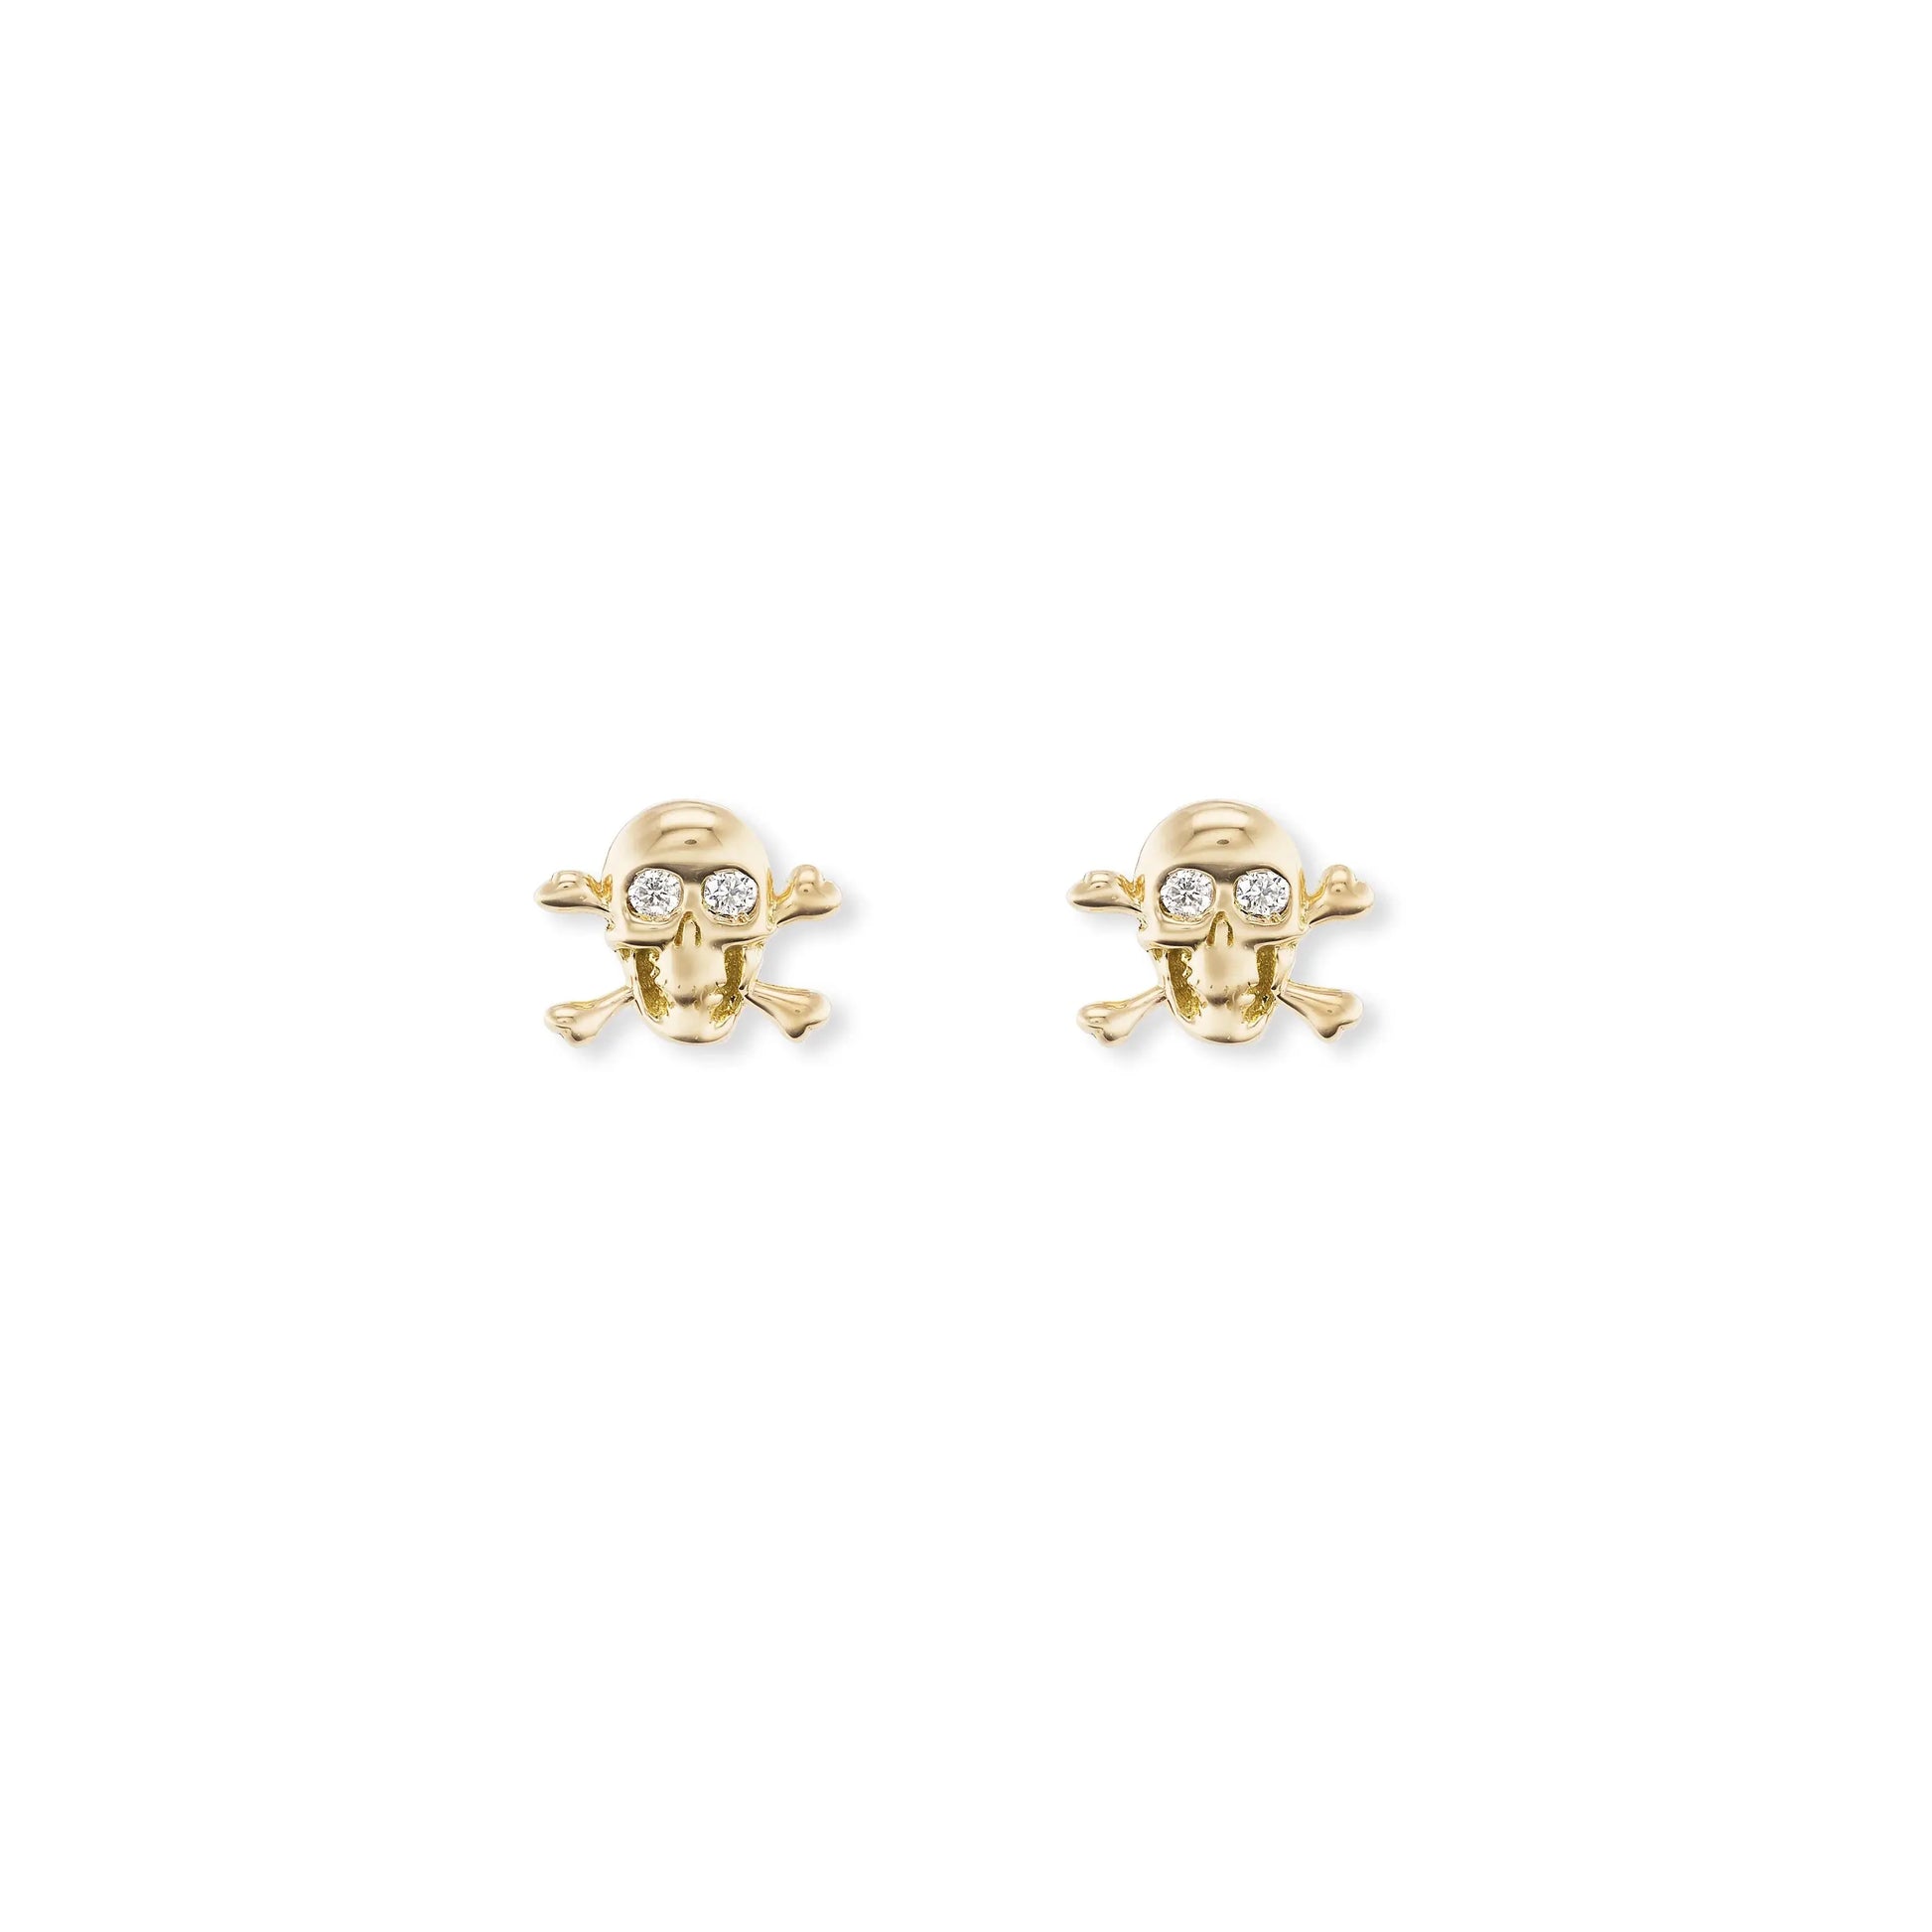 Brent Neale's pieces are so much fun. These studs are so cool and great for a second hole. They are 18K Yellow Gold and Diamonds with a Skull and Crossbones. They measure 5.5mm x 6.7mm and are post and nut closure.